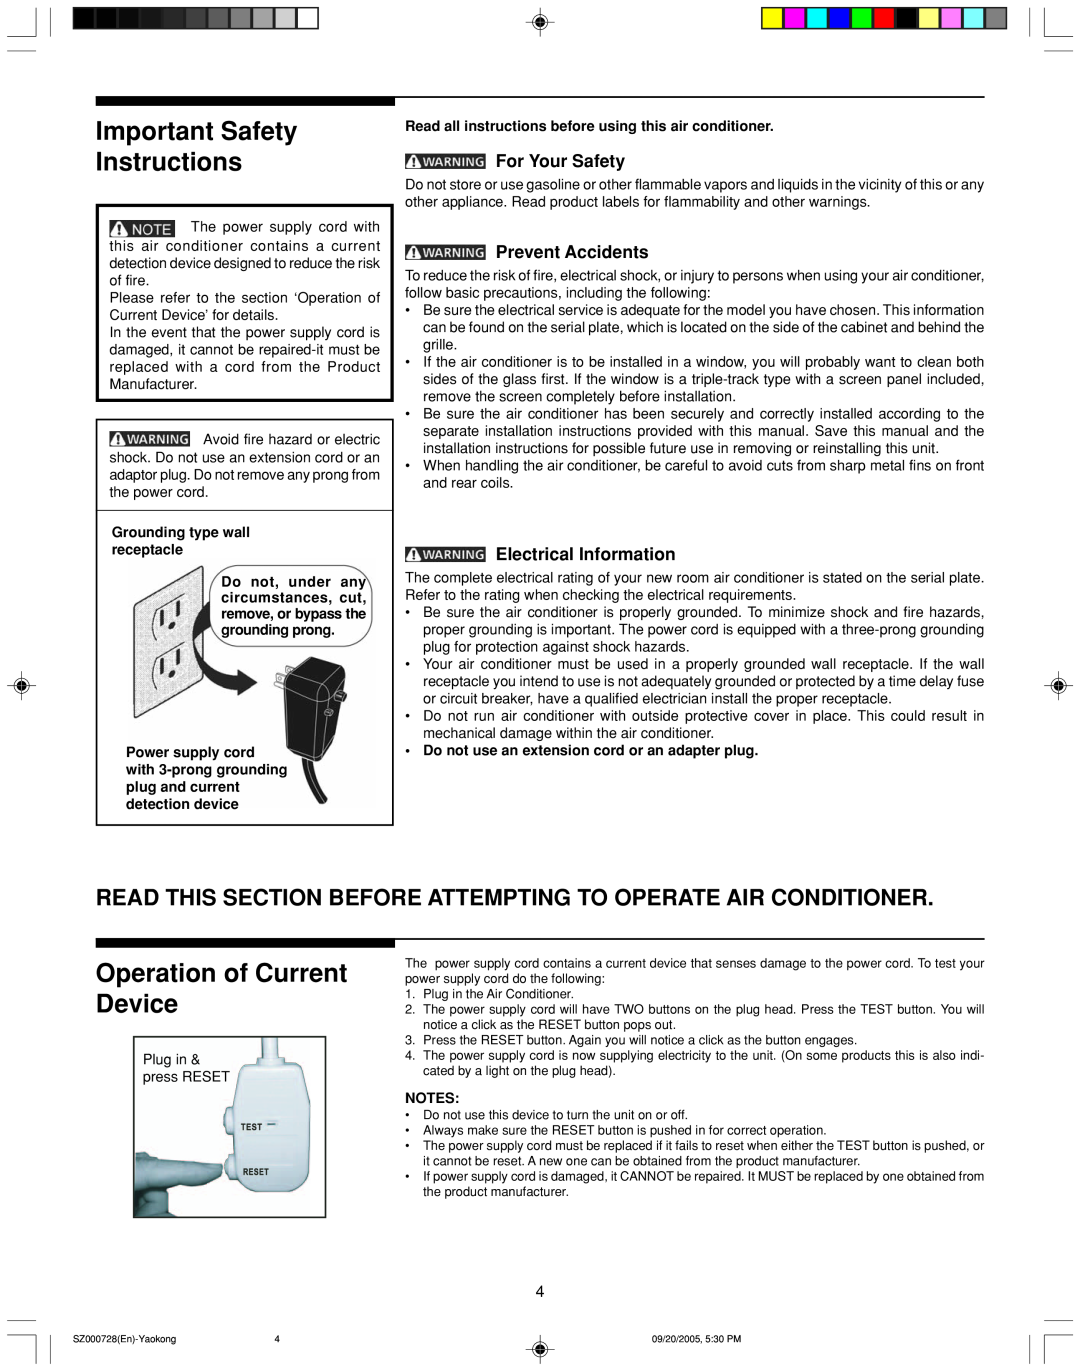 Frigidaire ELECTRONIC CONTROL AIR CONDITIONER Important Safety Instructions, Operation of Current Device, For Your Safety 